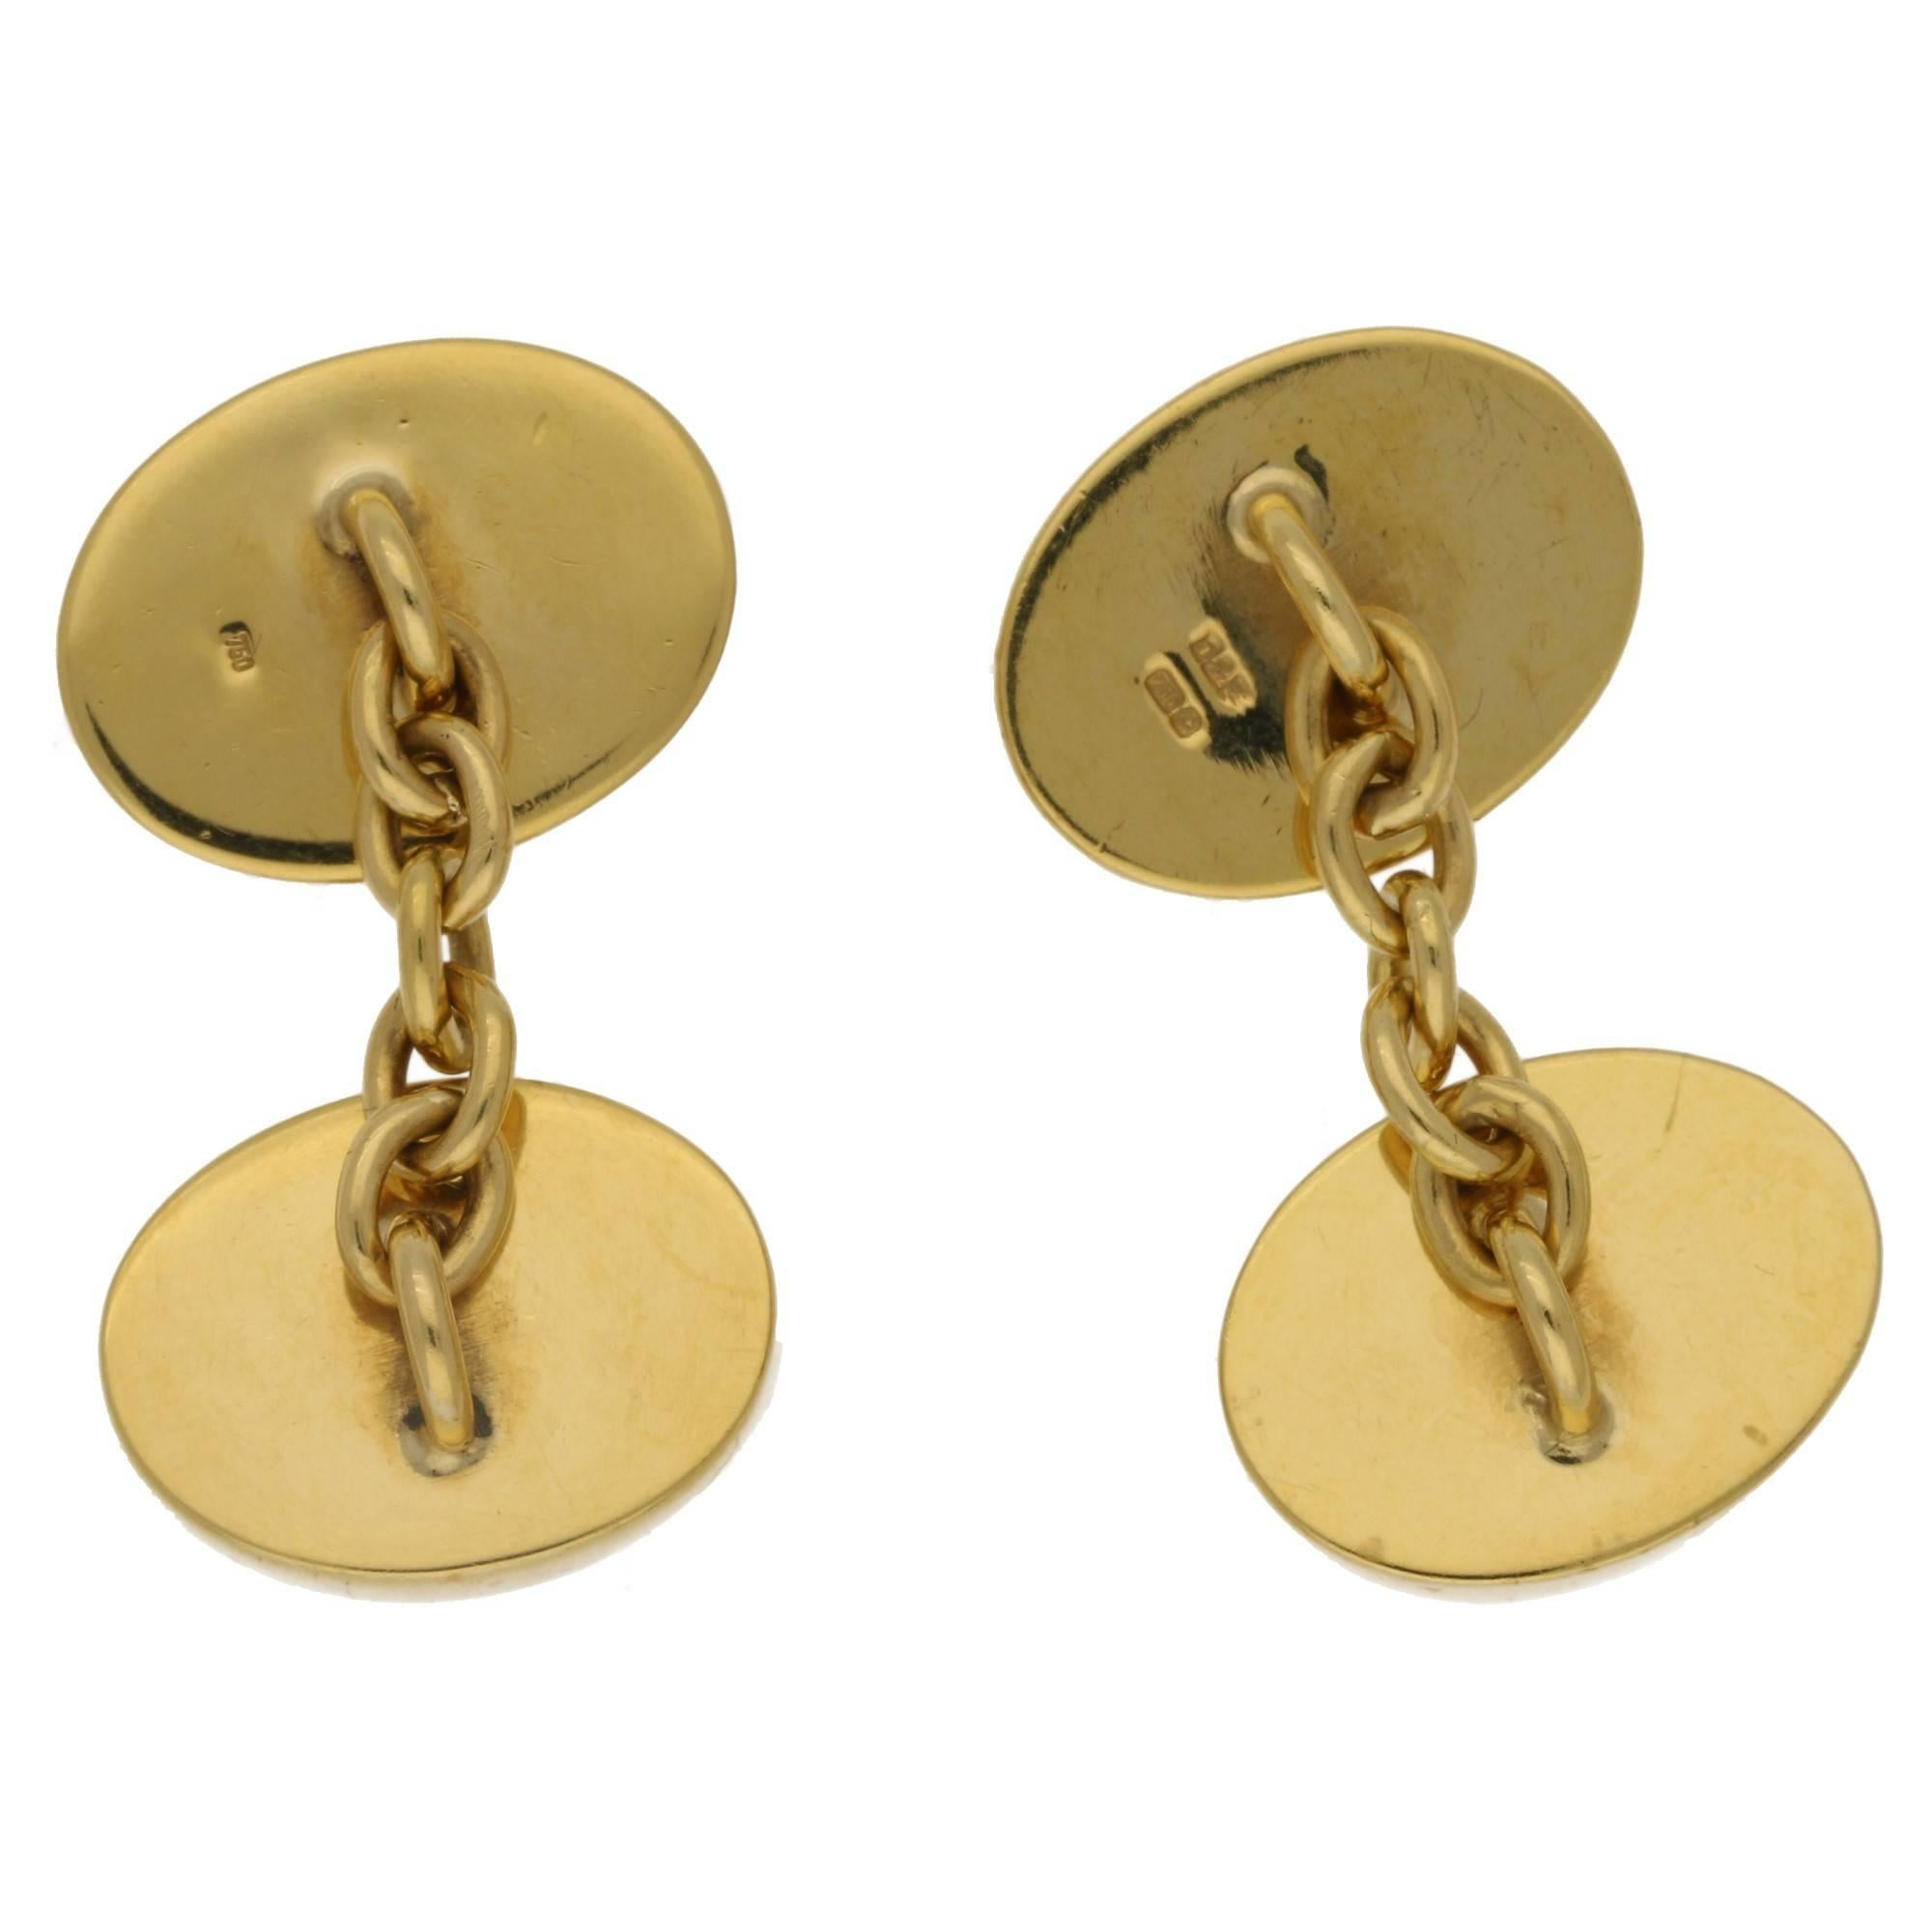 These cufflinks are stunningly detailed, depicting on one side a duck in flight and the other a duck standing. The colours are vibrant and these are set in a rich 18k gold on a classic five link chain fitting. A beautiful example of British made